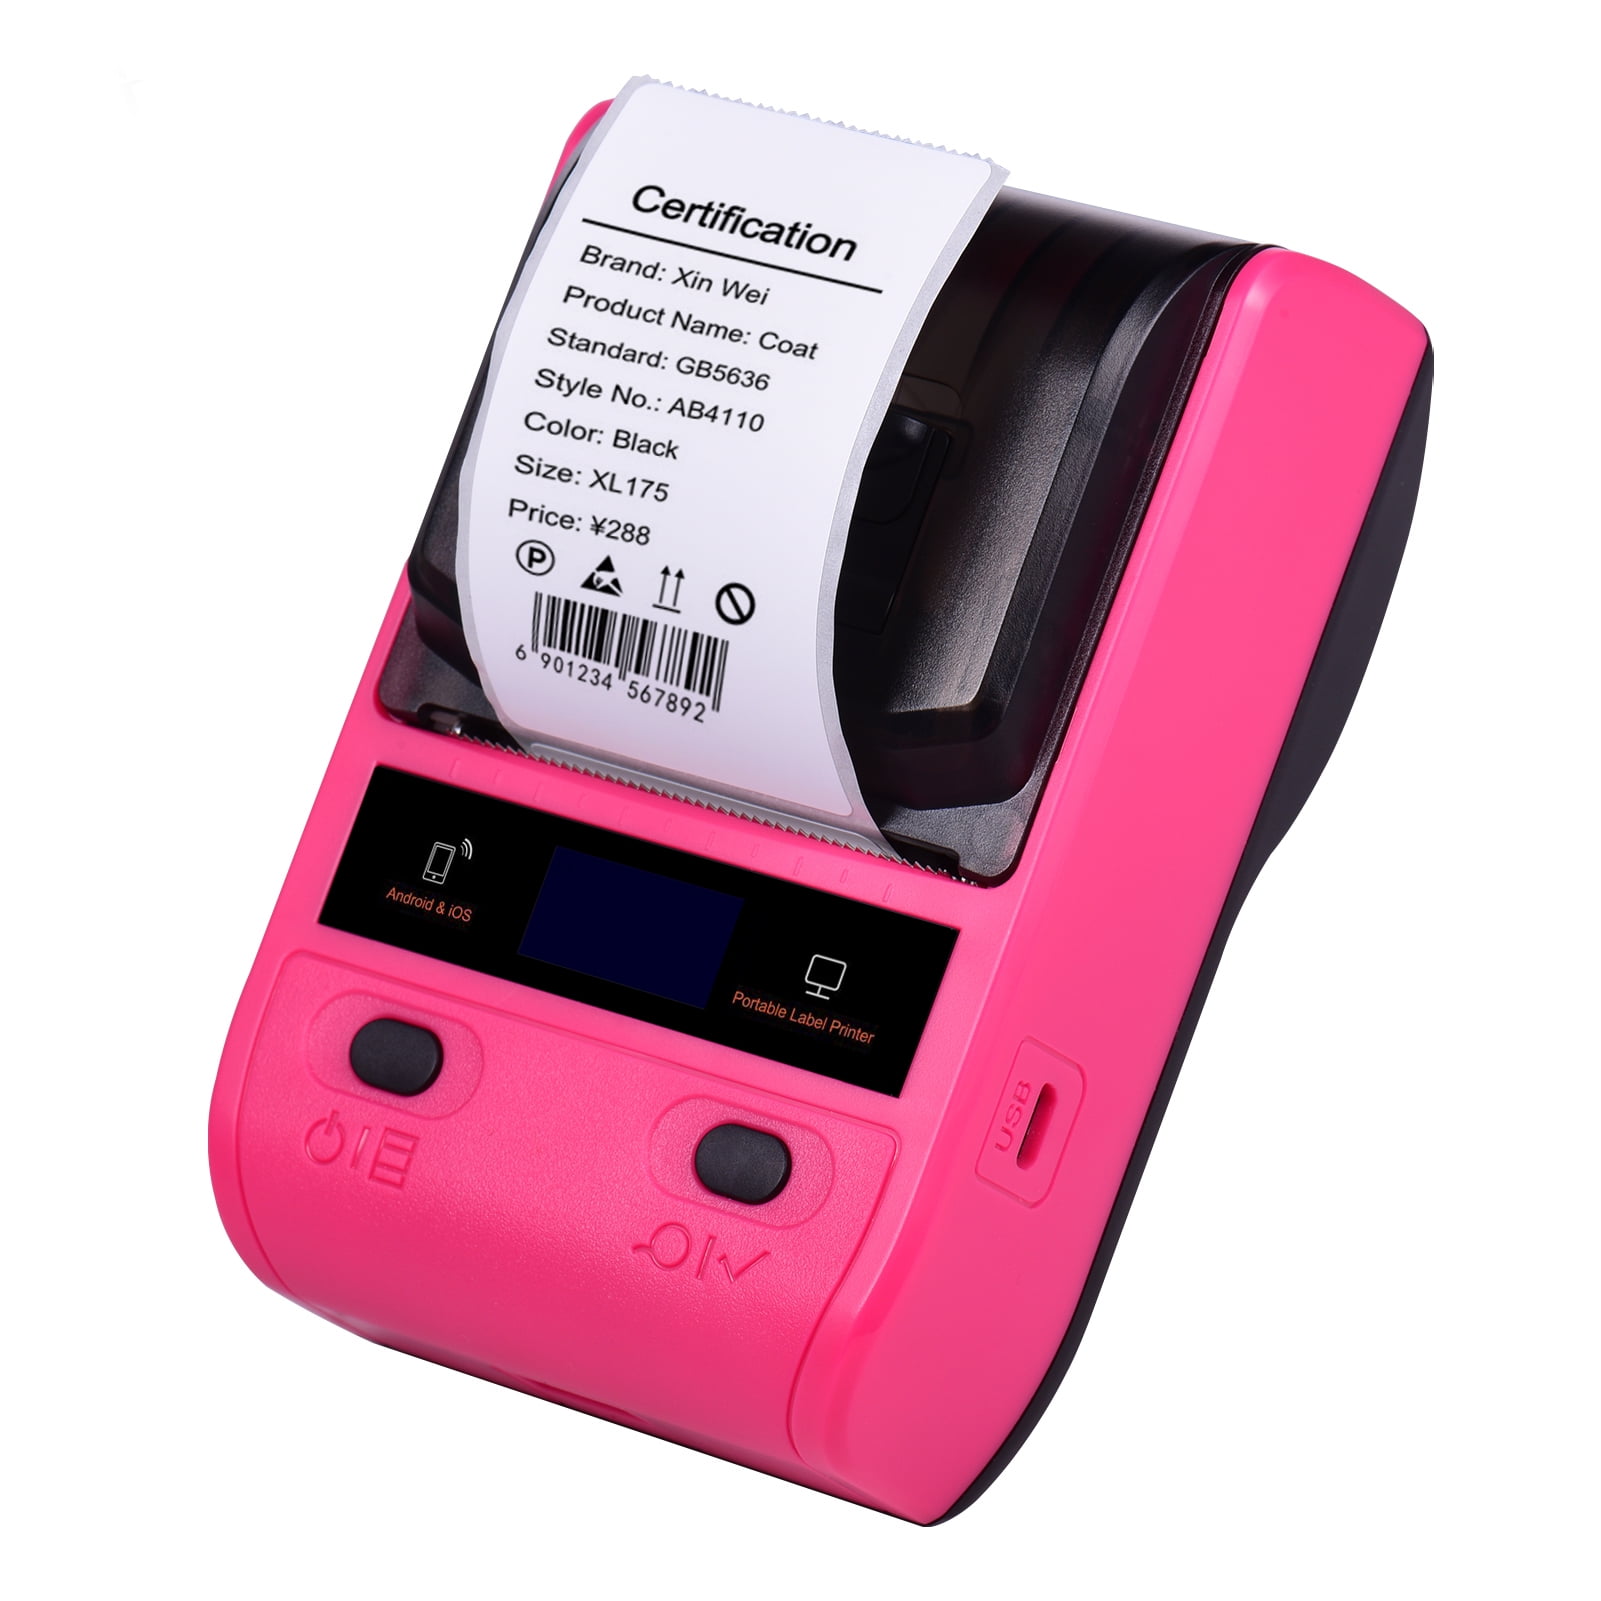 peeling Modtager Jurassic Park DP23 57mm Portable Thermal Printer Wireless Shipping Express Printer for  Shipping Package Price Labels USB NFC BT Connection Support ESC/POS Command  1D 2D Bar-code Address Label Compatible - Walmart.com